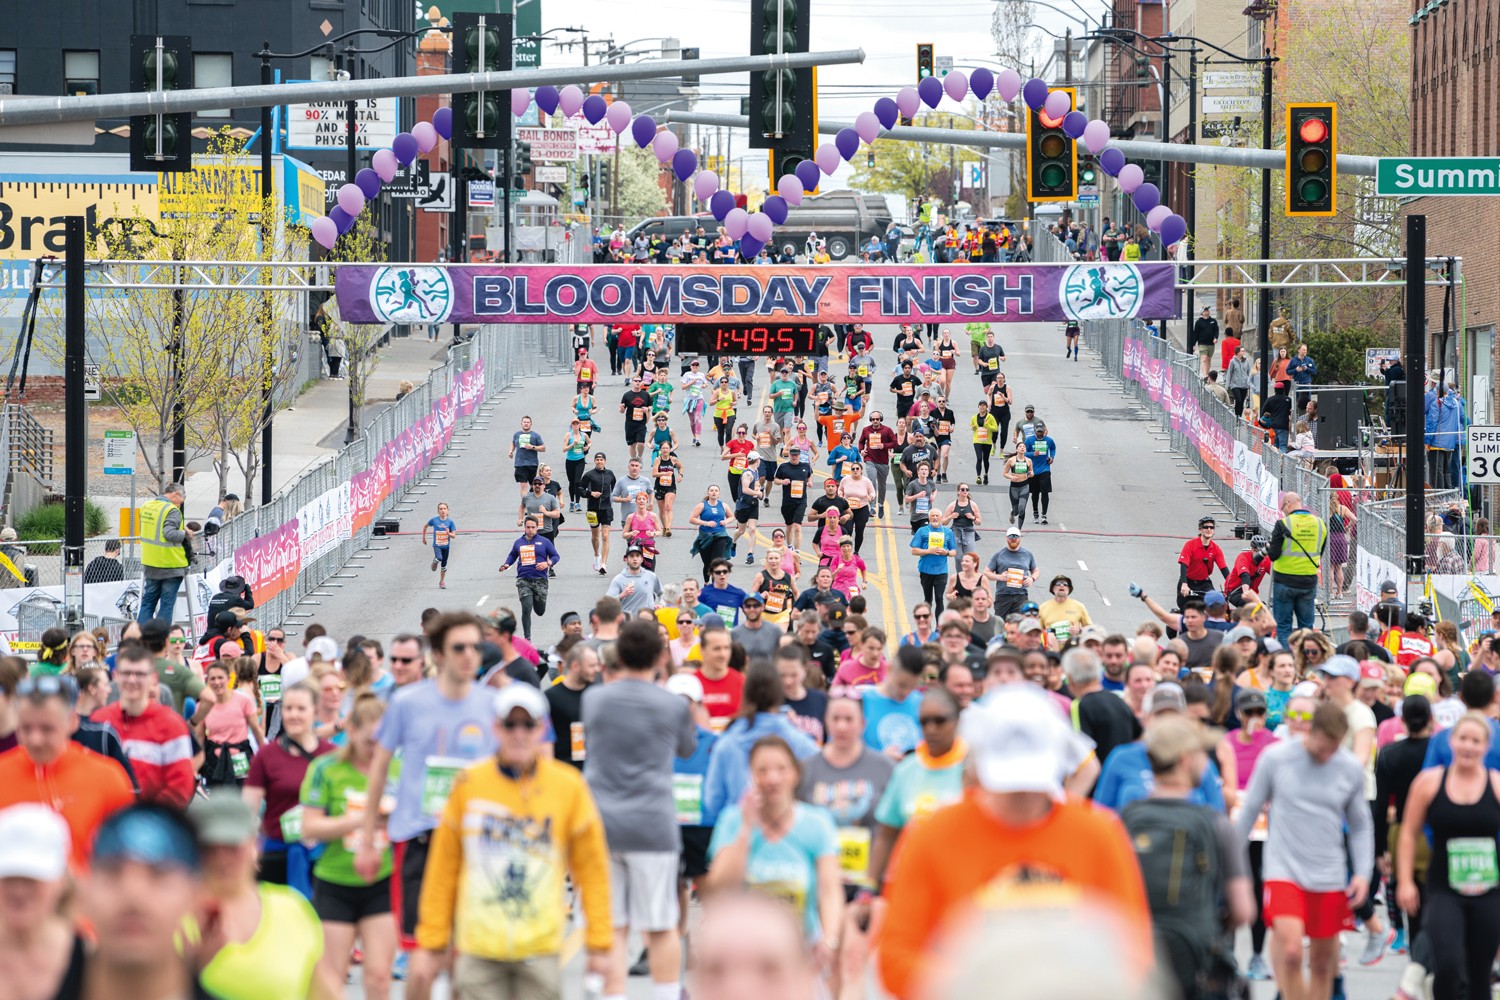 The 47thrunning of Bloomsday approaches and offers favorite events